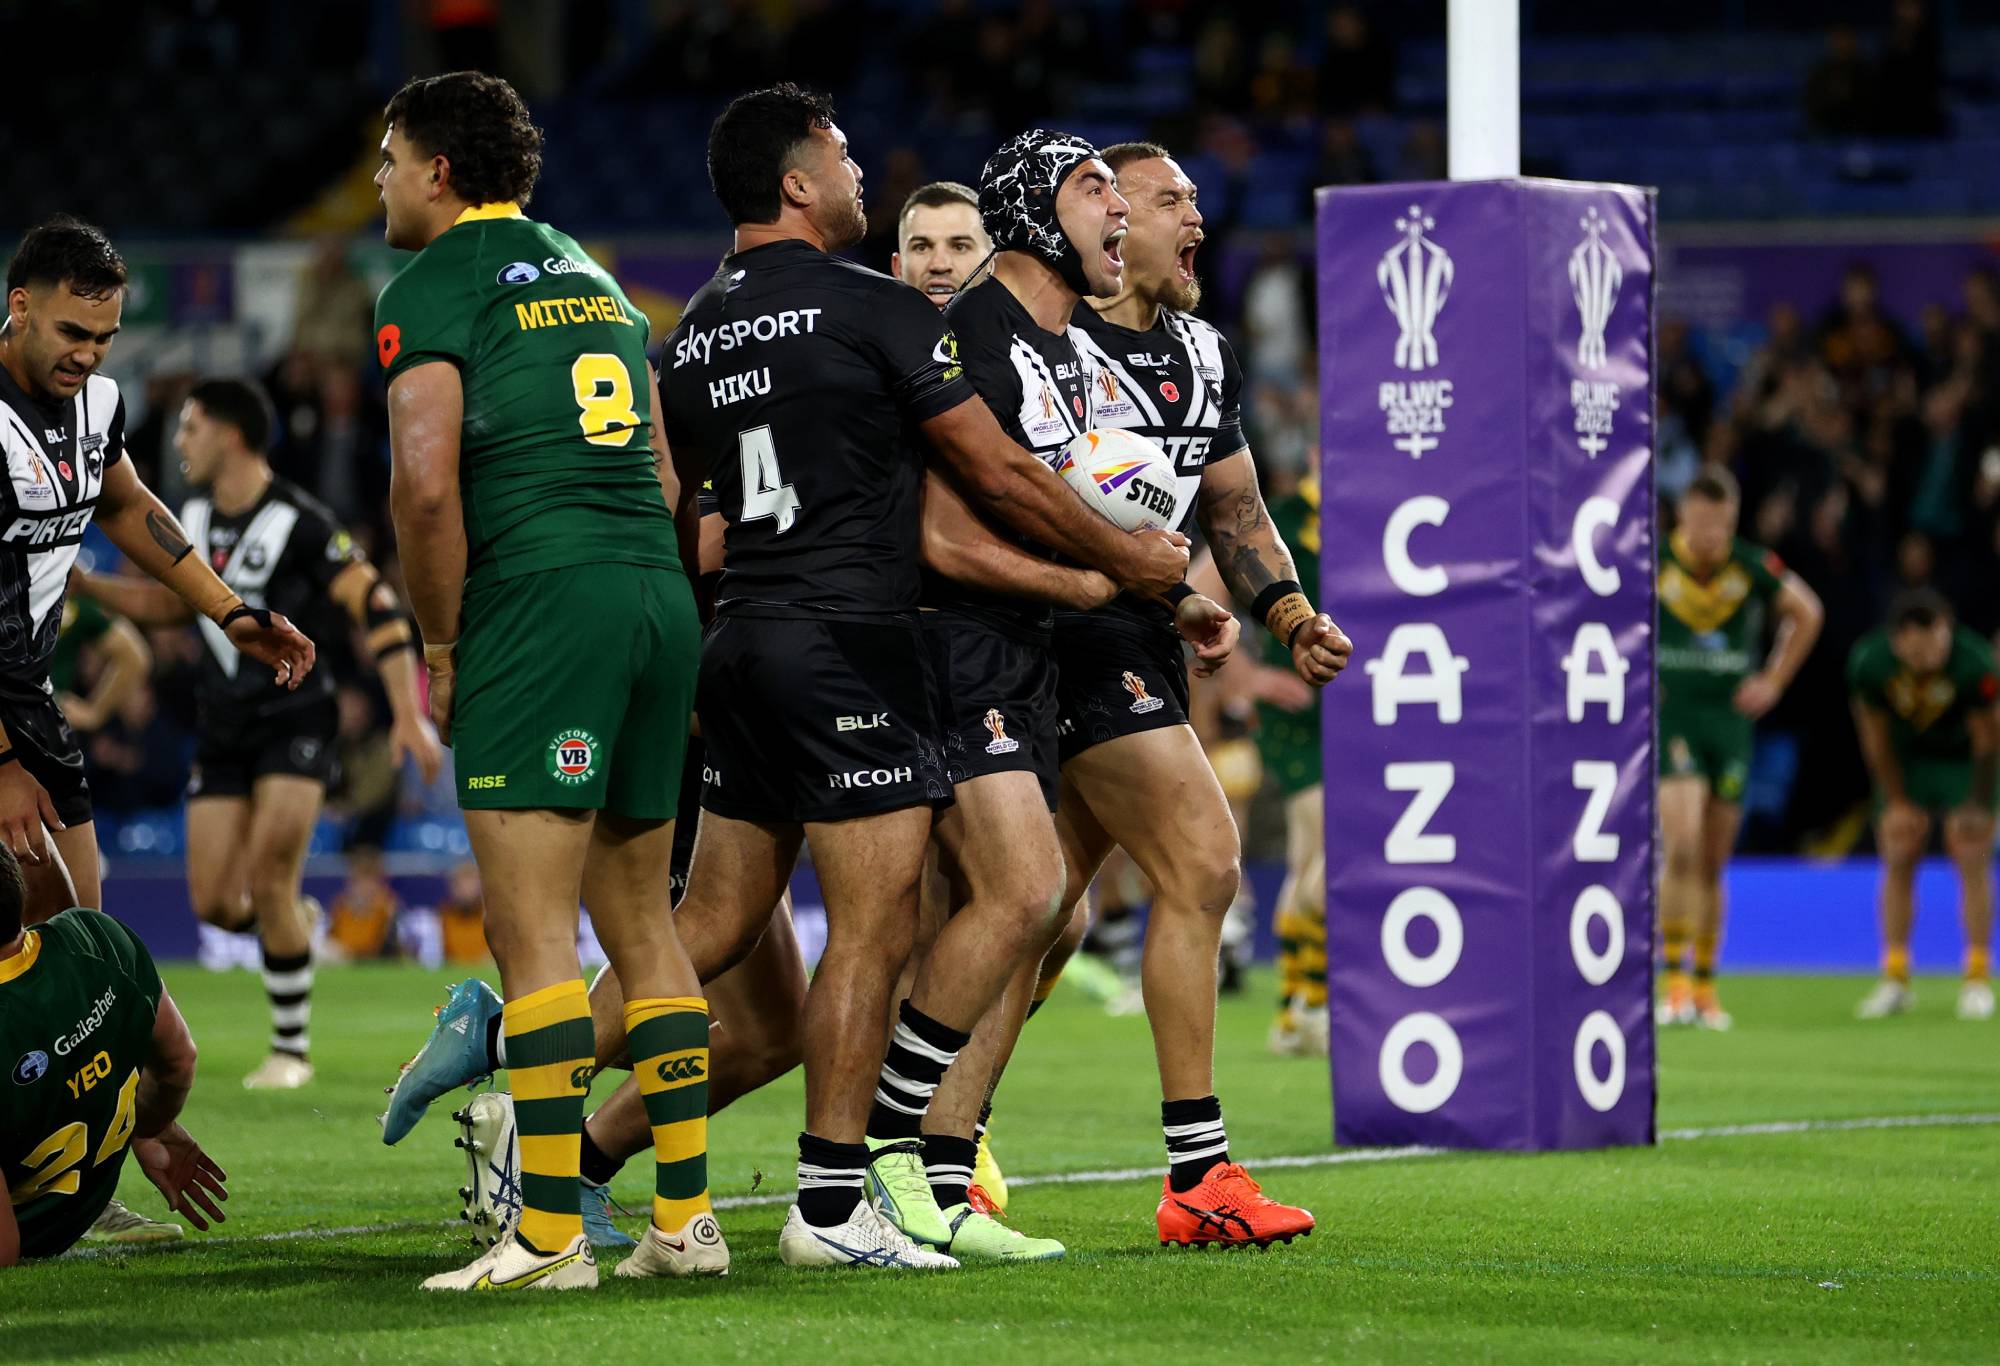 LEEDS, ENGLAND - NOVEMBER 11: Jahrome Hughes of New Zealand celebrates their sides first try during the Rugby League World Cup Semi-Final match between Australia and New Zealand at Elland Road on November 11, 2022 in Leeds, England. (Photo by Michael Steele/Getty Images)